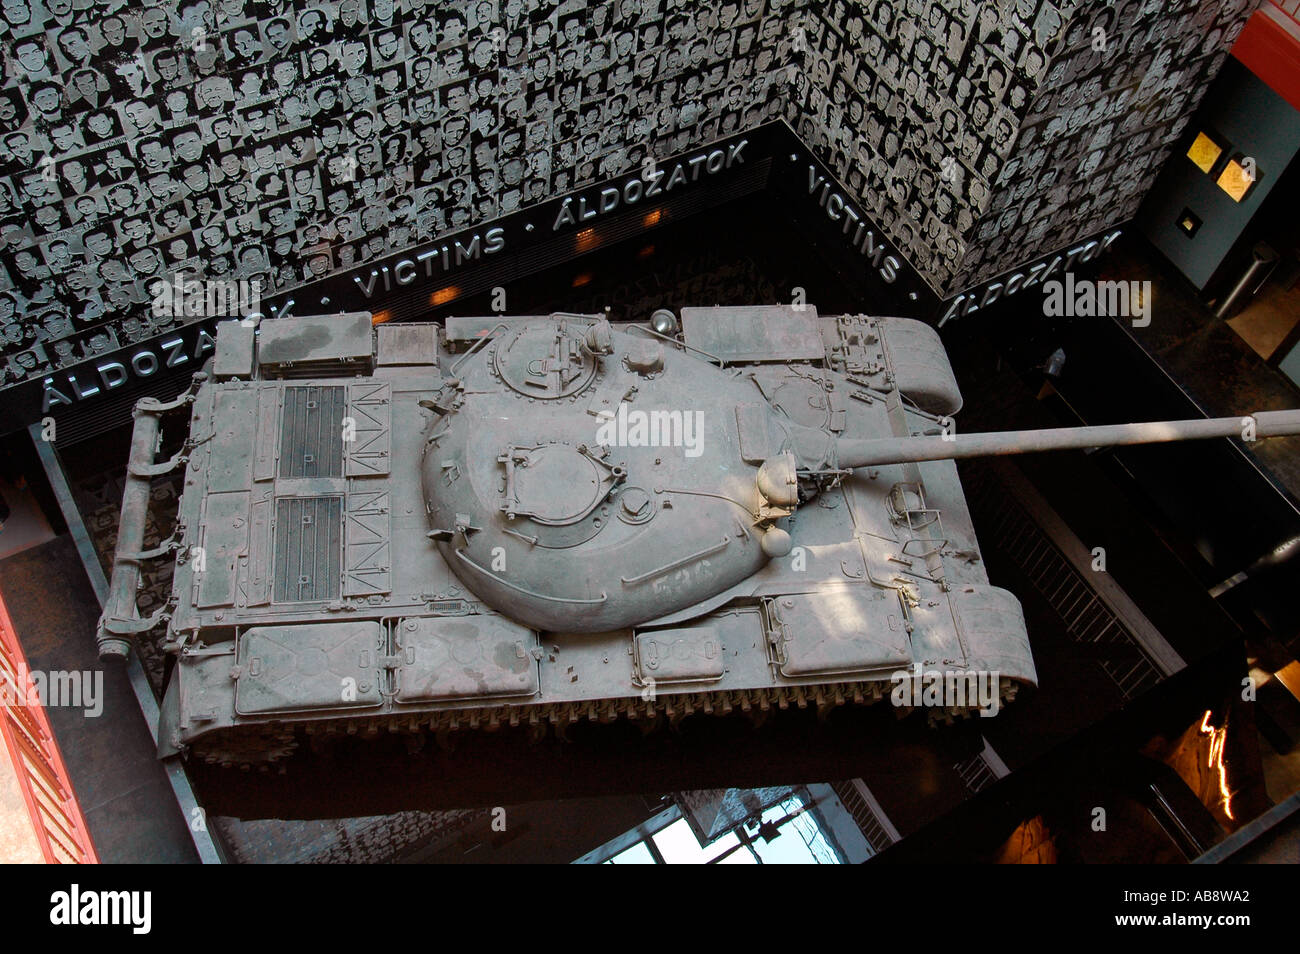 T-54 tank with installation of photos featuring victims of Hungarian Communist regime displayed inside House of Terror Haza Museum in Budapest Hungary Stock Photo